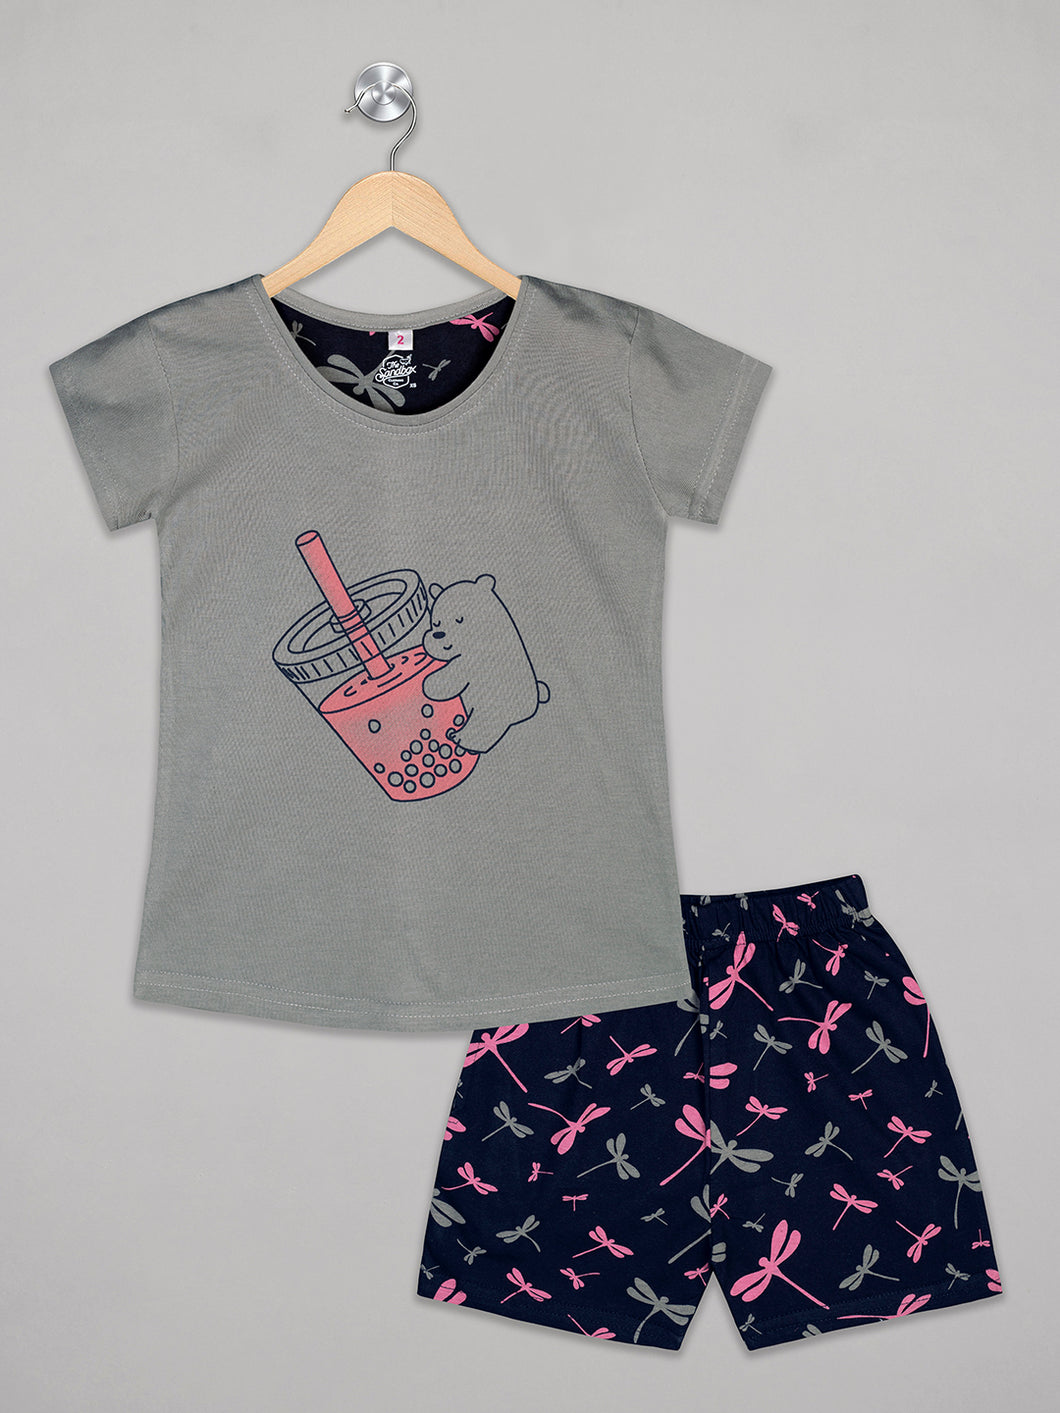 The Sandbox Clothing Co Top and short set 9068